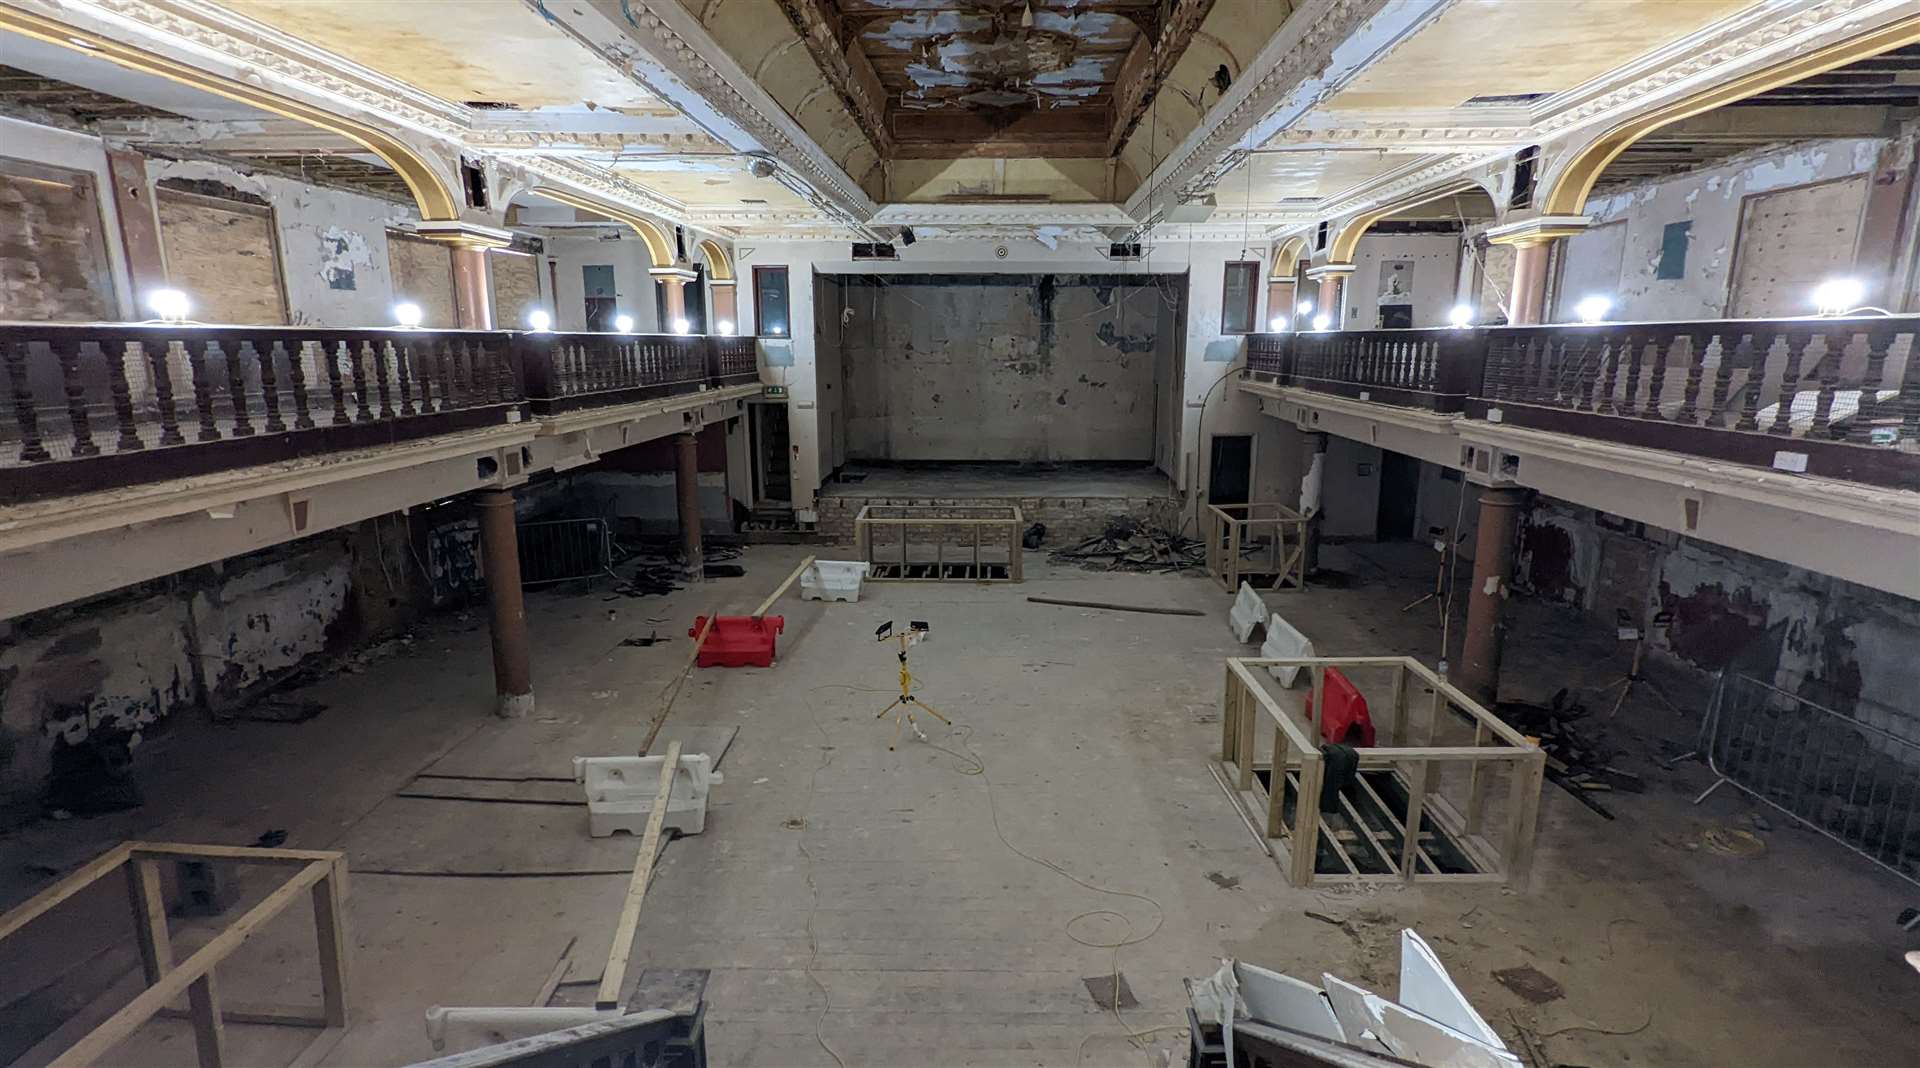 Building work has started inside the former Leas Pavilion theatre in Folkestone